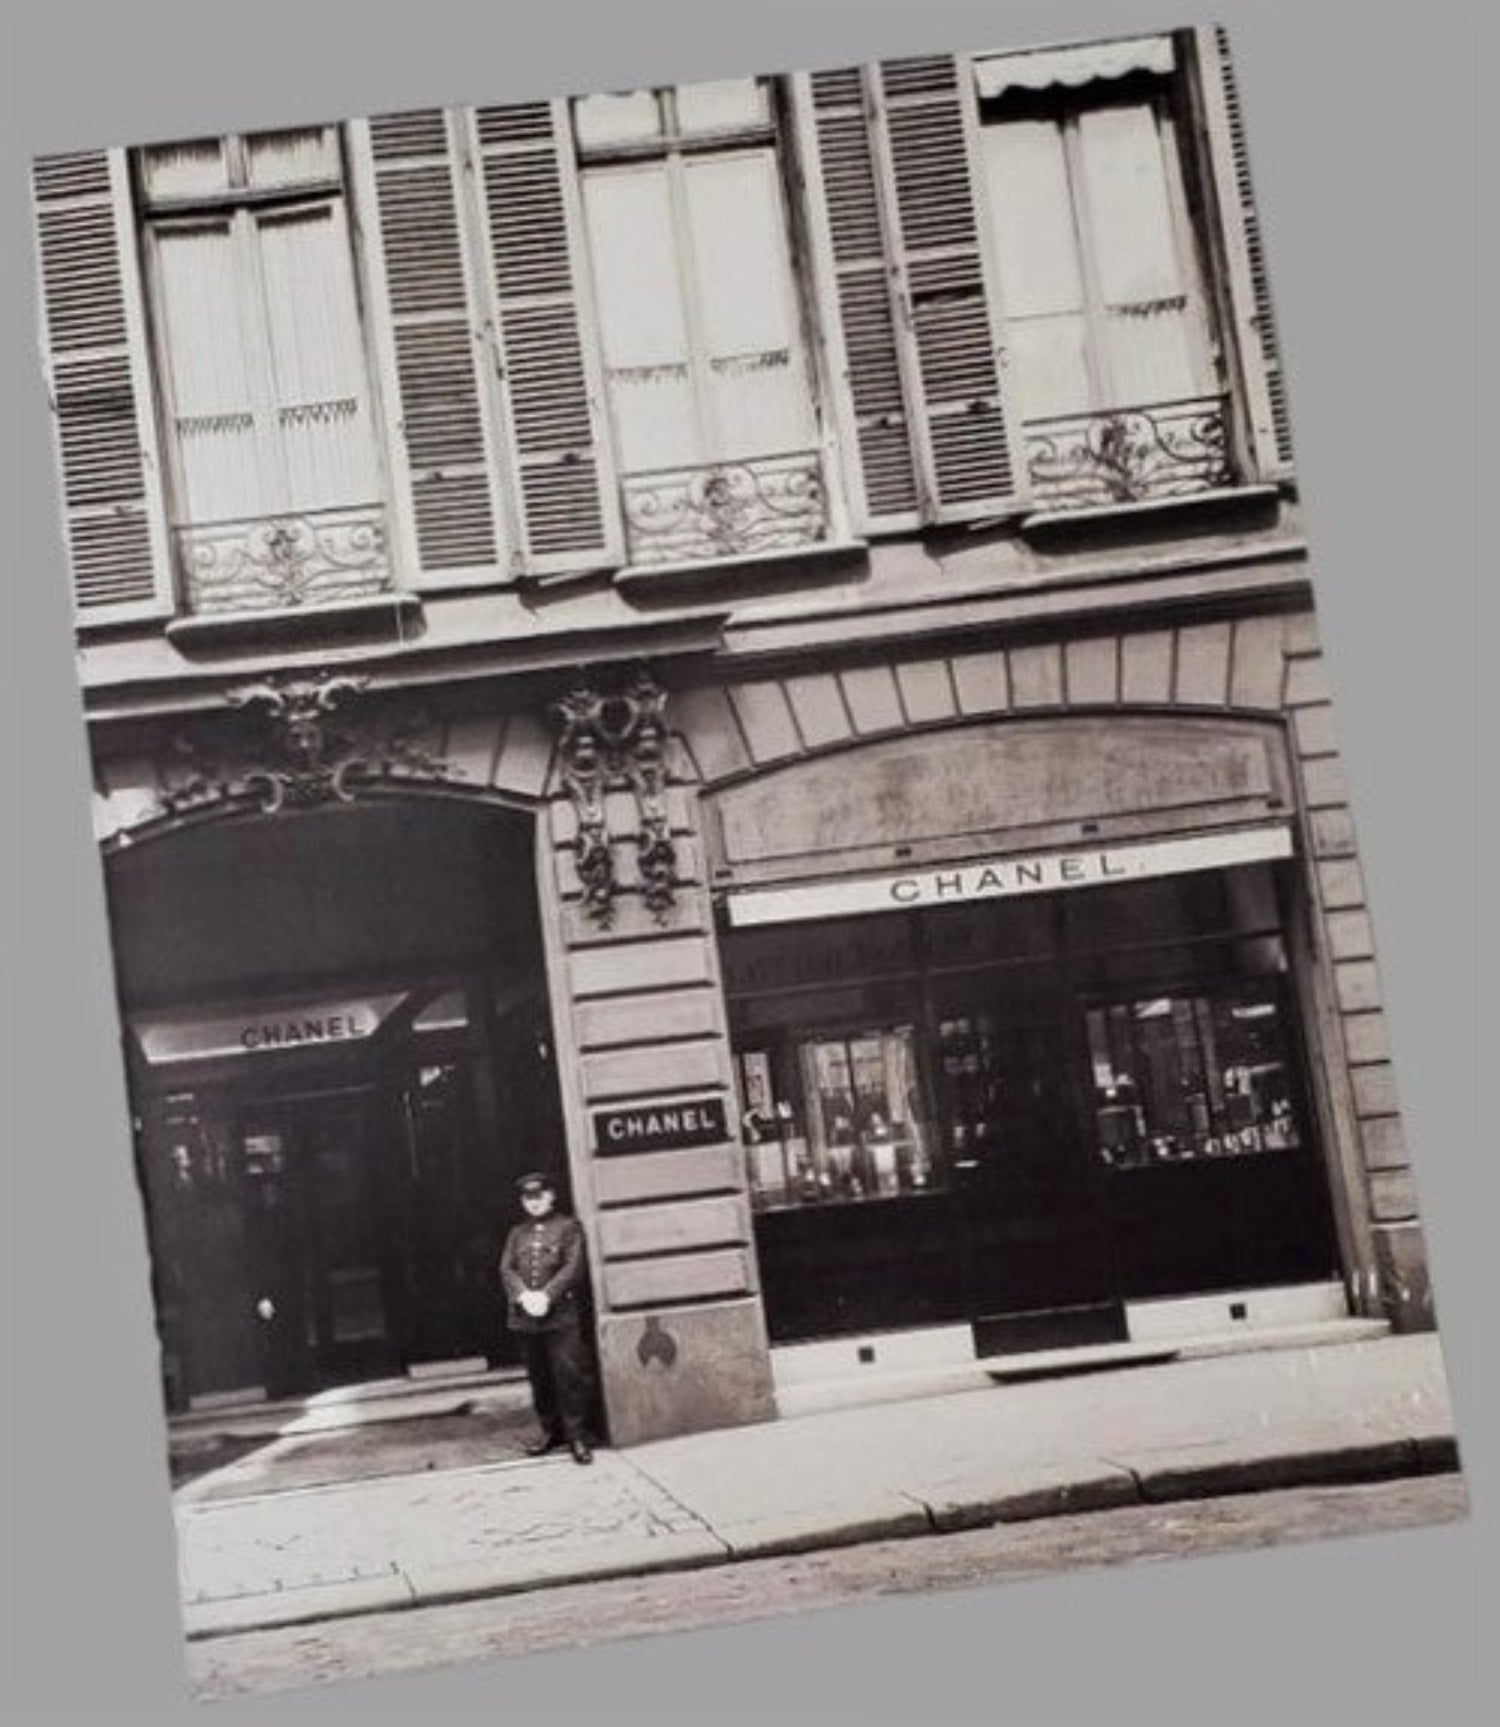 Chanel Store Paris Photograph Art Print Available In AREA51GALLERY